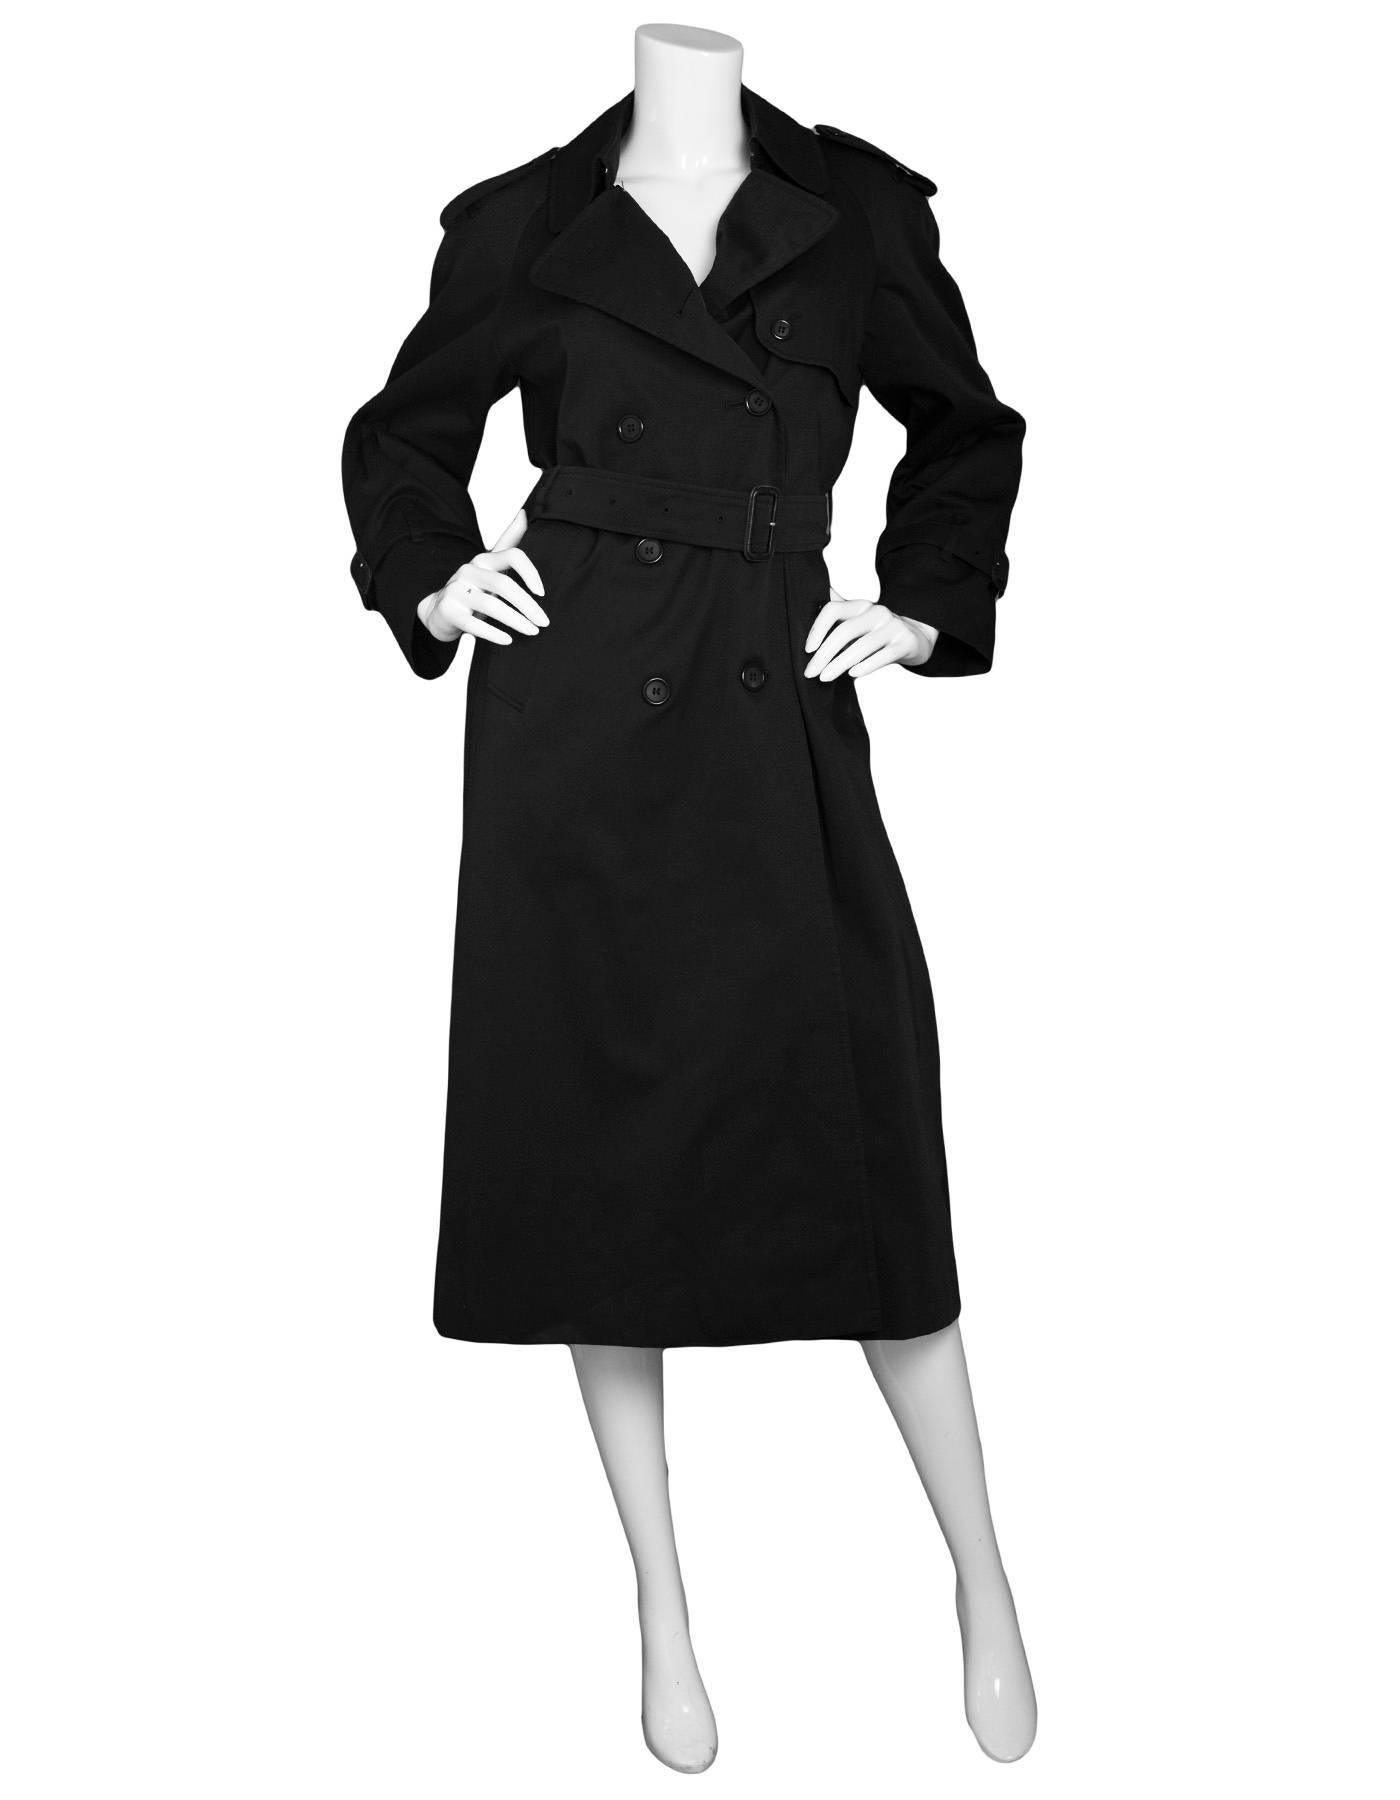 Burberry London Black Cotton Trench Coat 
**Note: Originally sold with a detachable lining- this coat is missing the detachable lining**
Features optional waist belt

Color: Black
Composition: 51% cotton, 49% polyester
Lining: Nova plaid, 50%